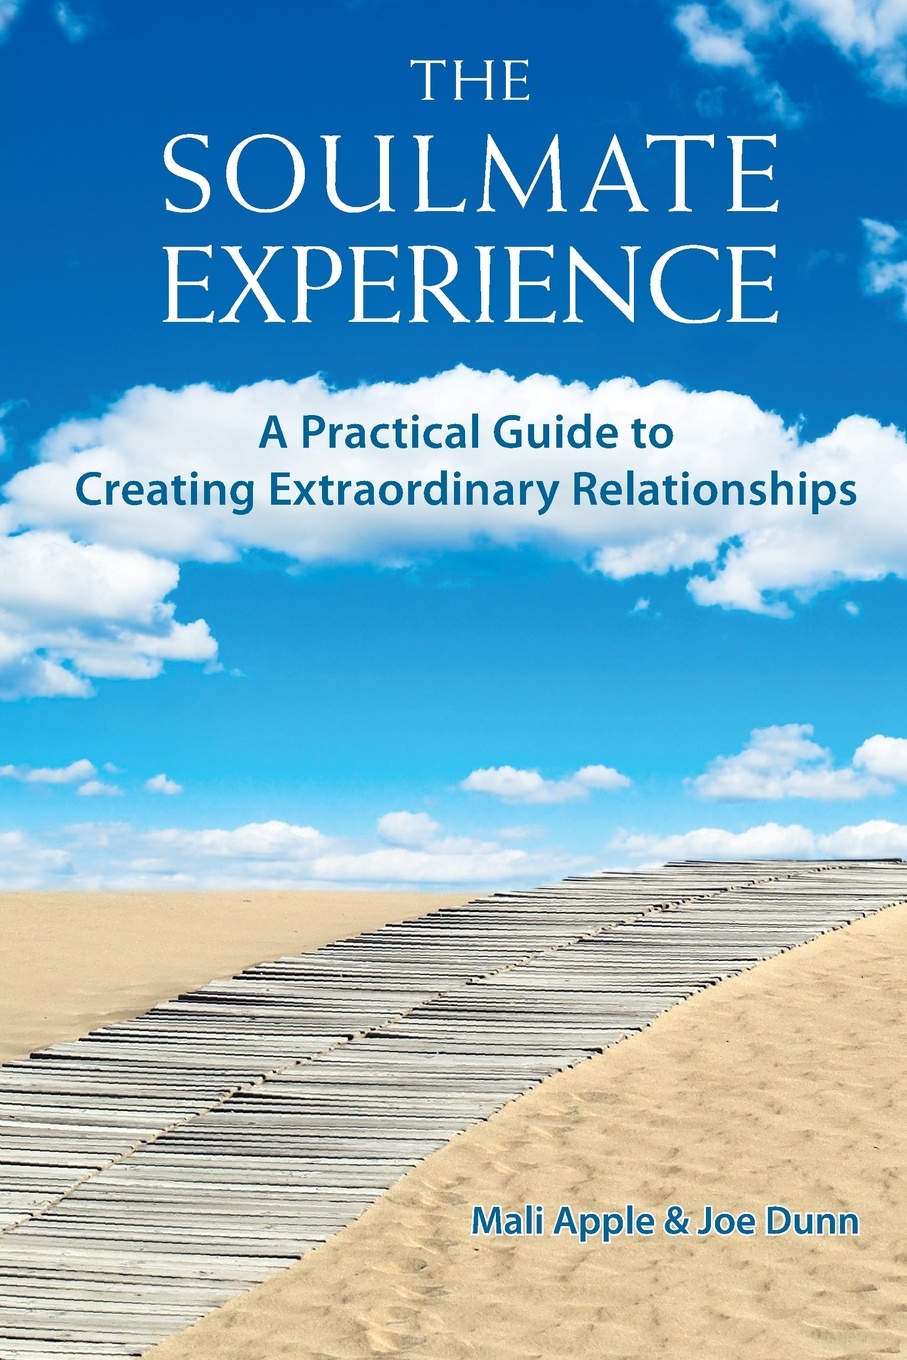 The Soulmate Experience. A Practical Guide to Creating Extraordinary Relationships